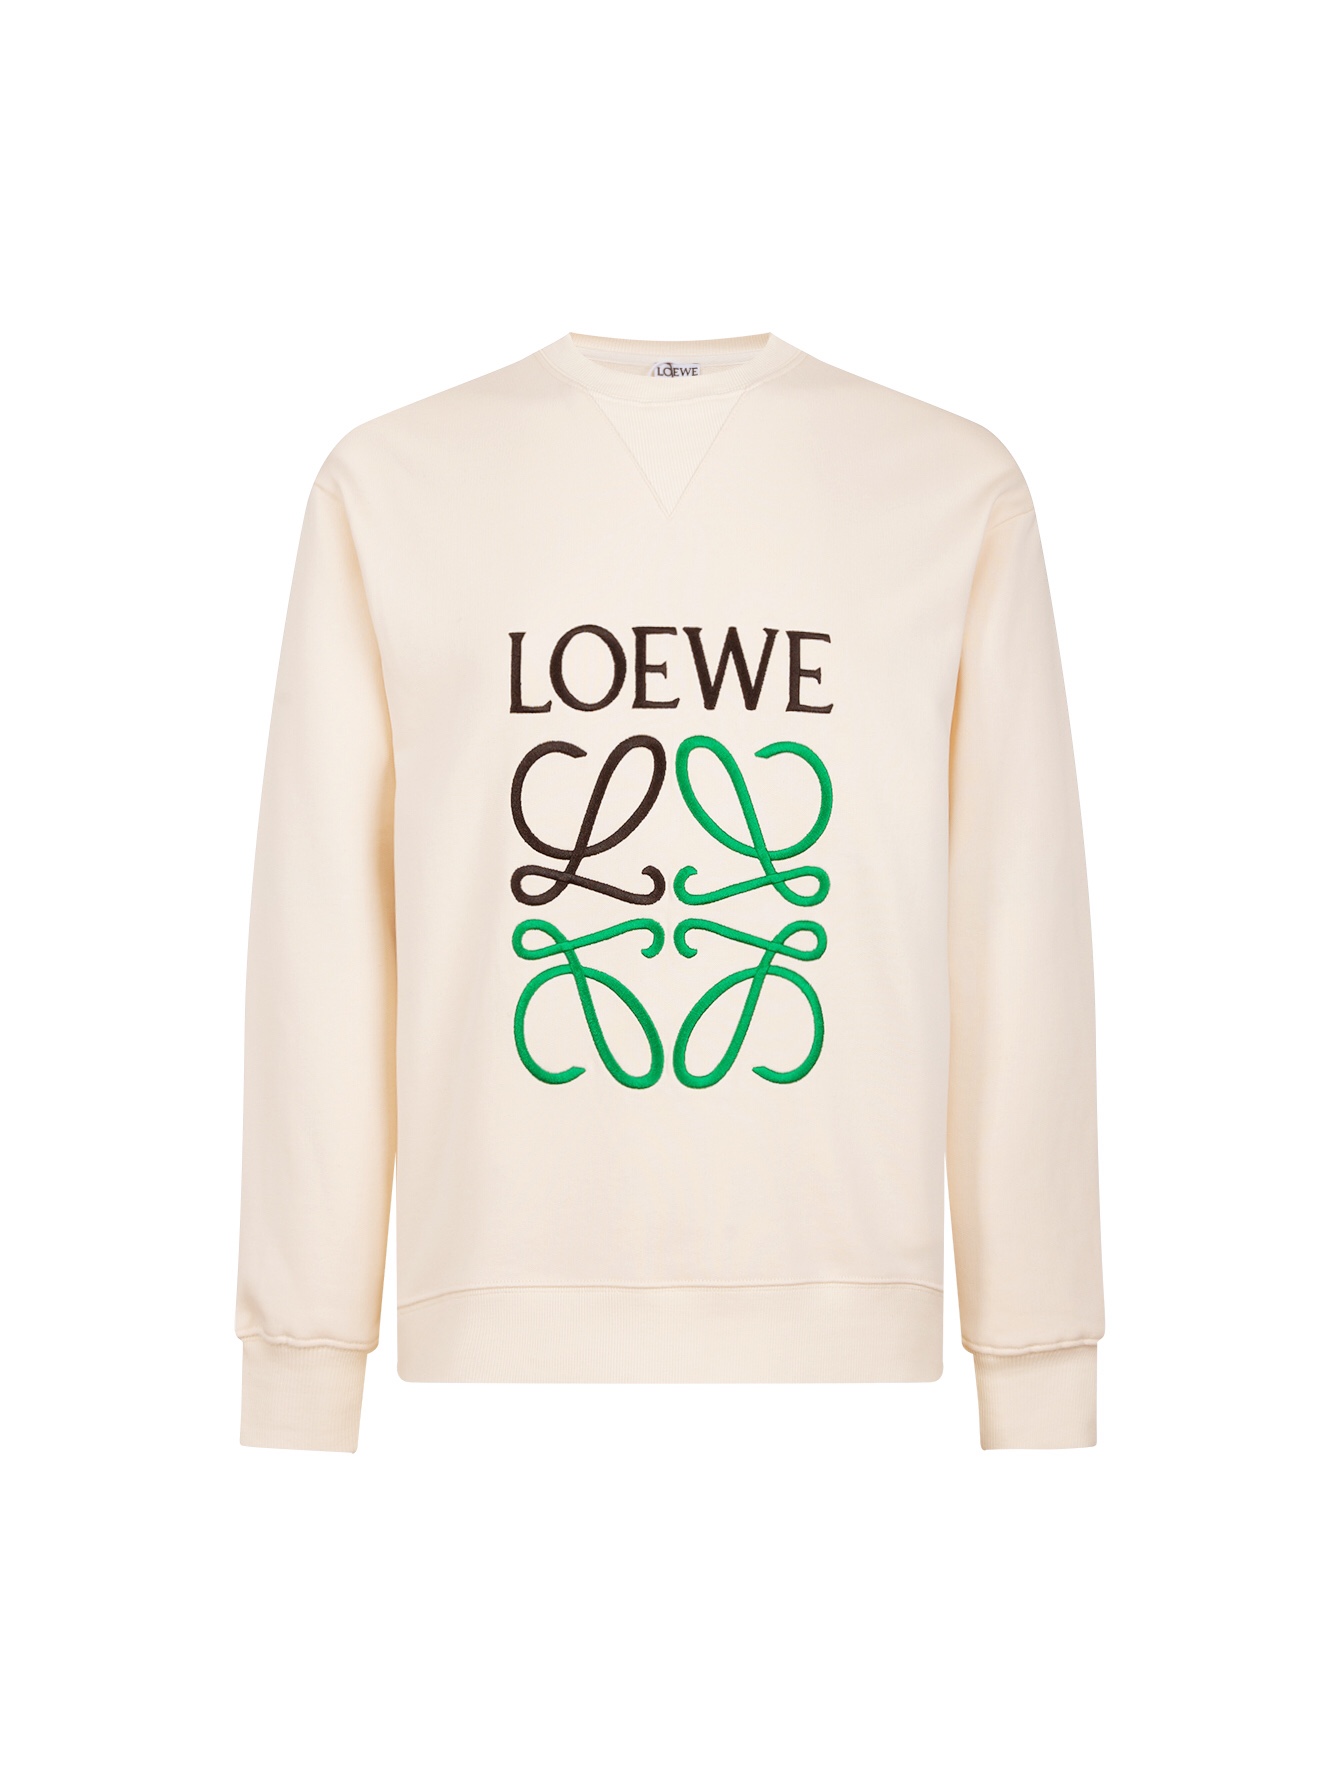 Buy the Best High Quality Replica
 Loewe Clothing Sweatshirts Apricot Color Black White Embroidery Unisex Cotton